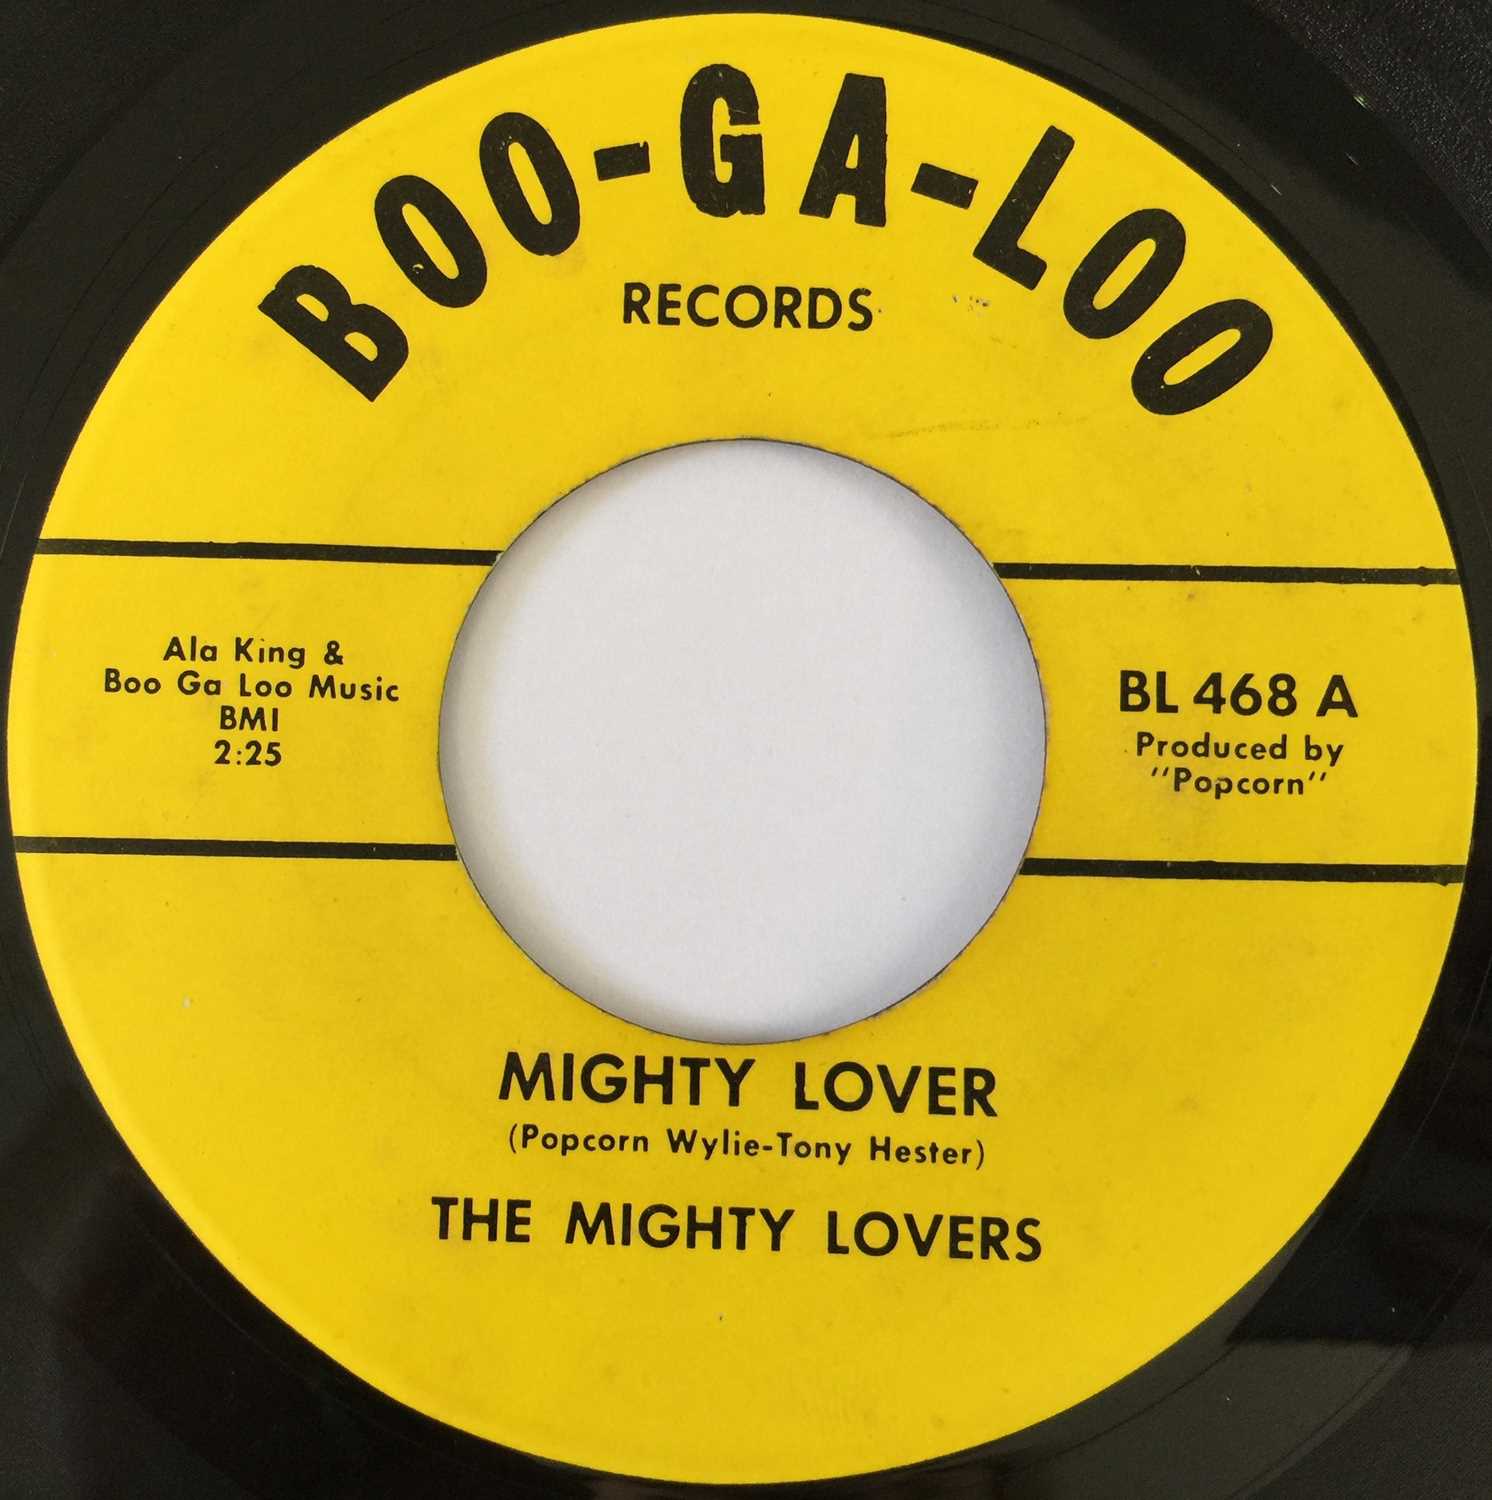 Lot 34 - THE MIGHTY LOVERS - MIGHTY LOVER/ SOUL BLUES 7" (US SOUL - BOO-GA-LOO RECORDS BL 468)